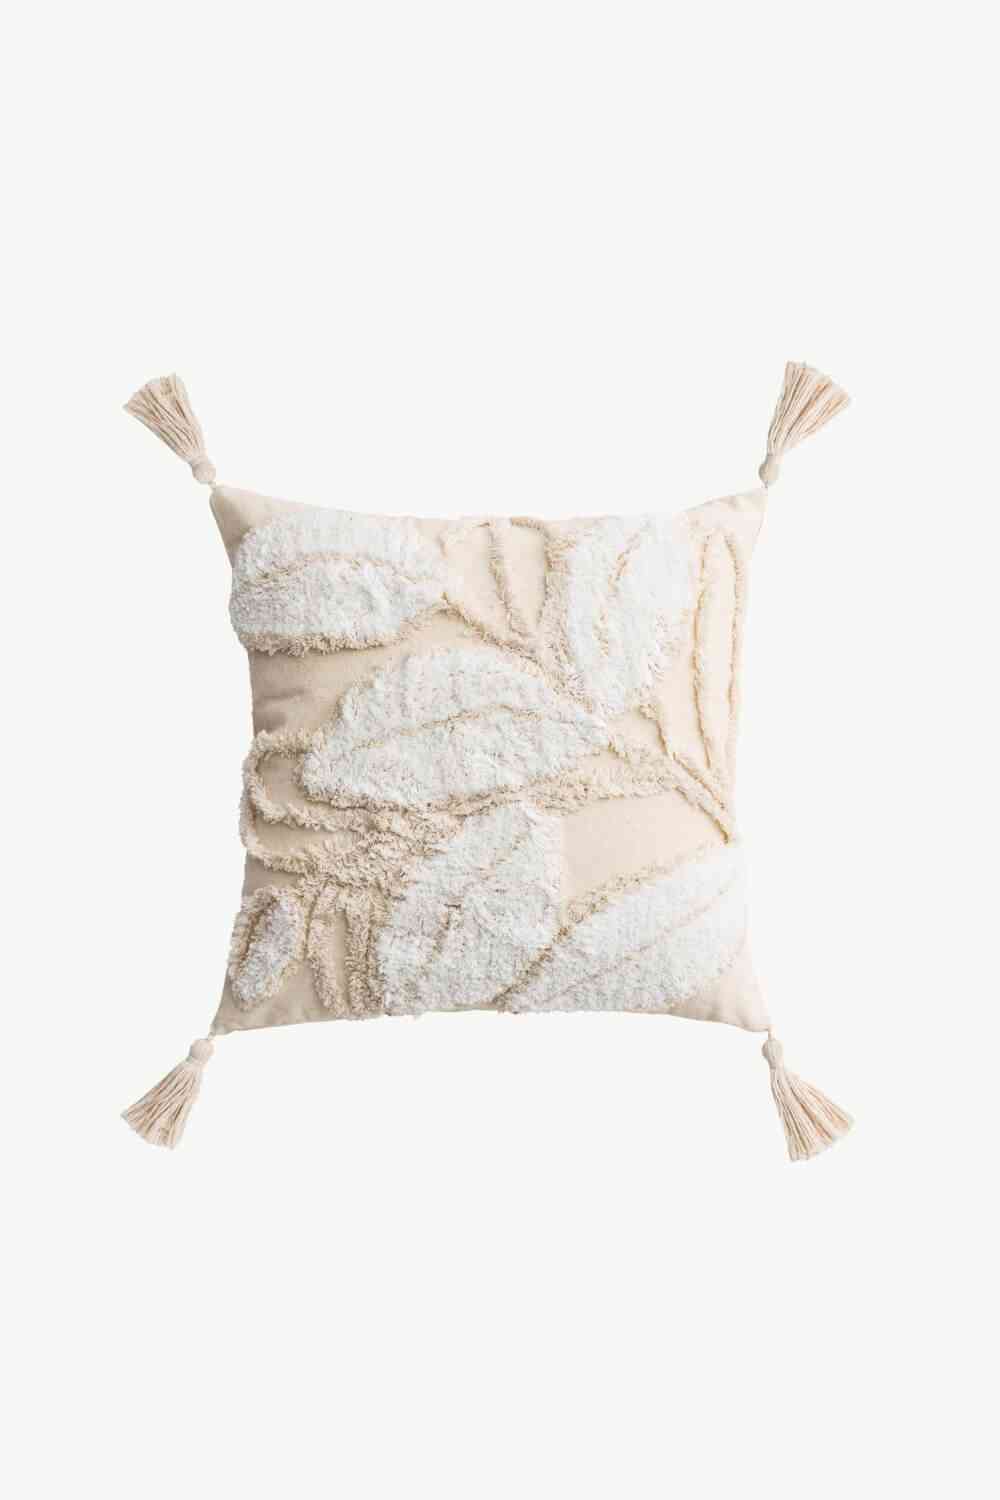 Textured Decorative Throw Pillow Case - Decorative Pillowcases - Tophatter's Smashing Daily Deals | We're Against Forced Labor in China